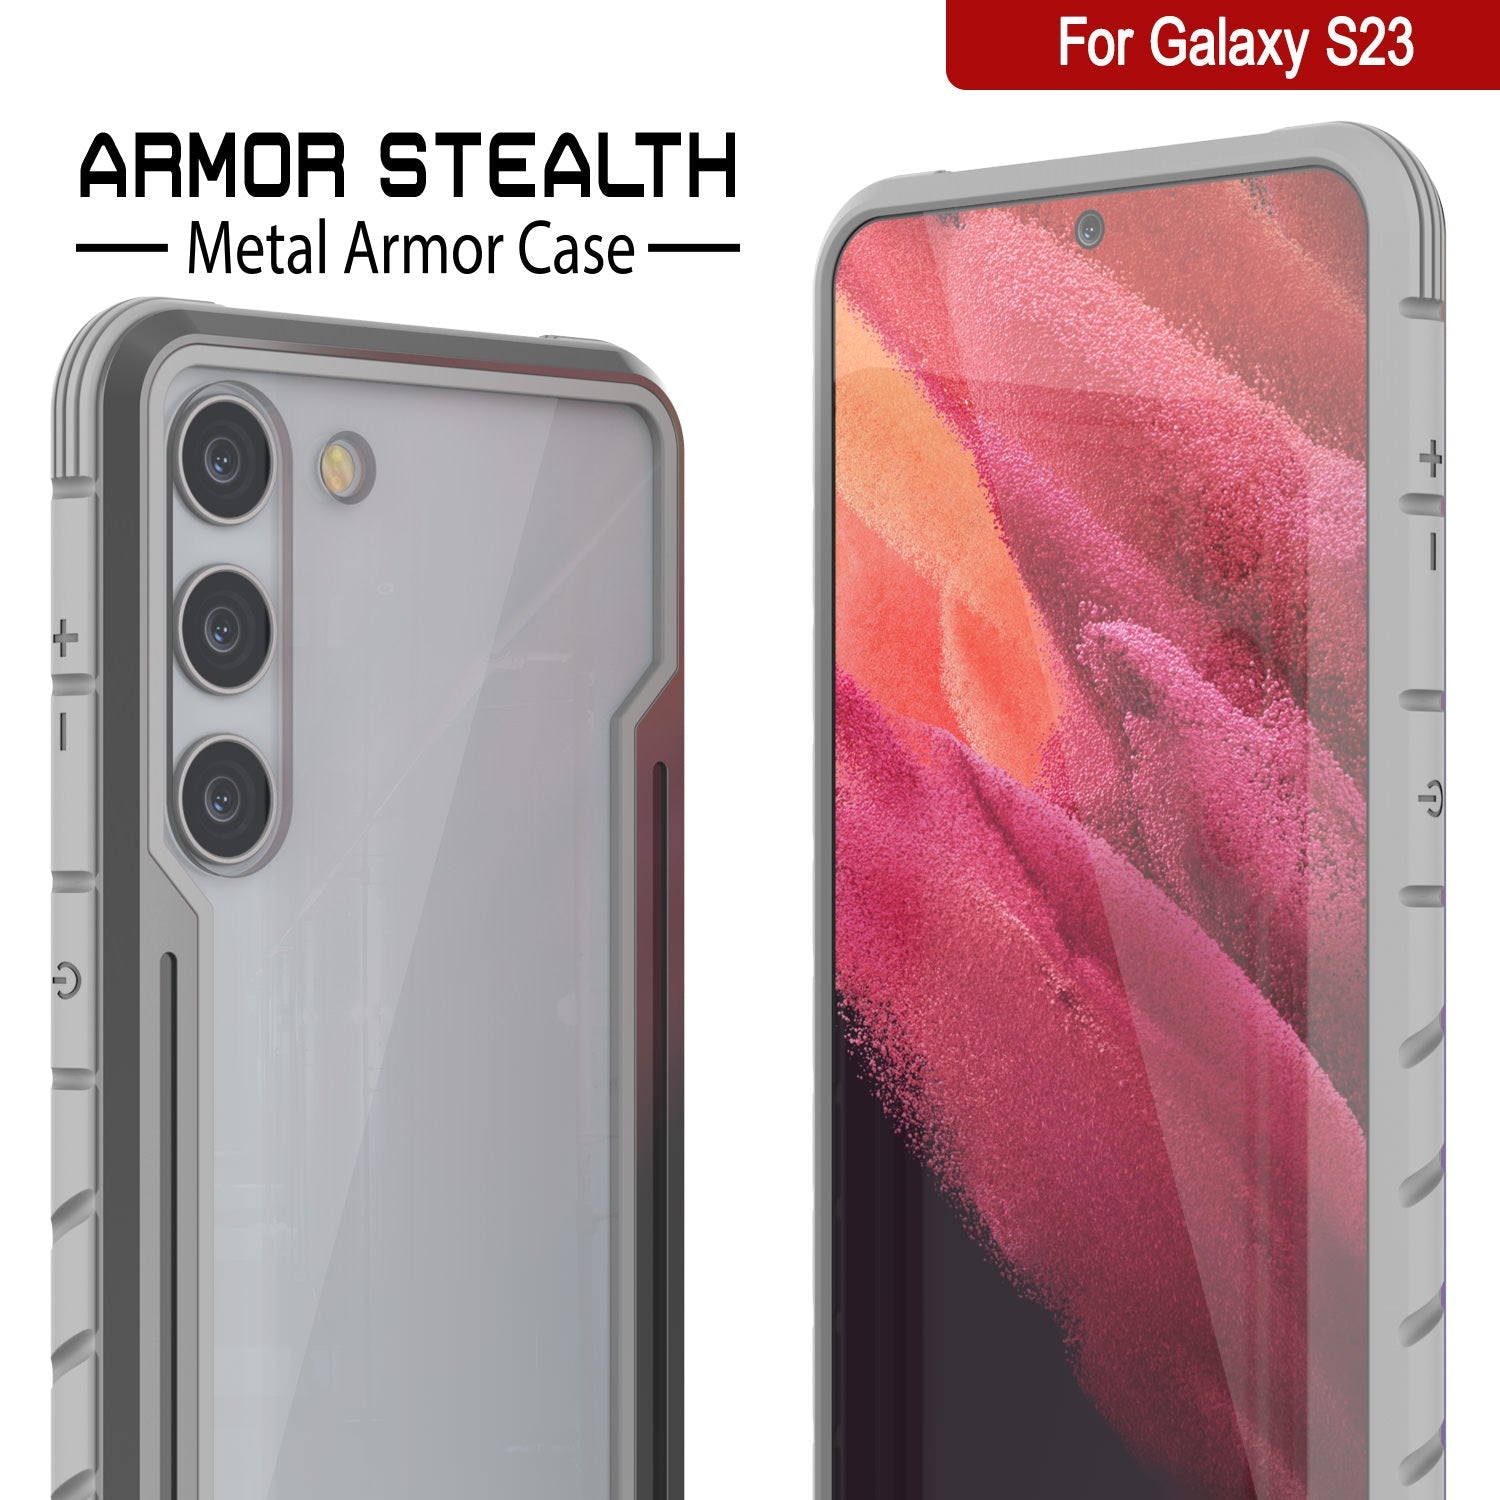 Punkcase S23 Armor Stealth Case Protective Military Grade Multilayer Cover [Grey]